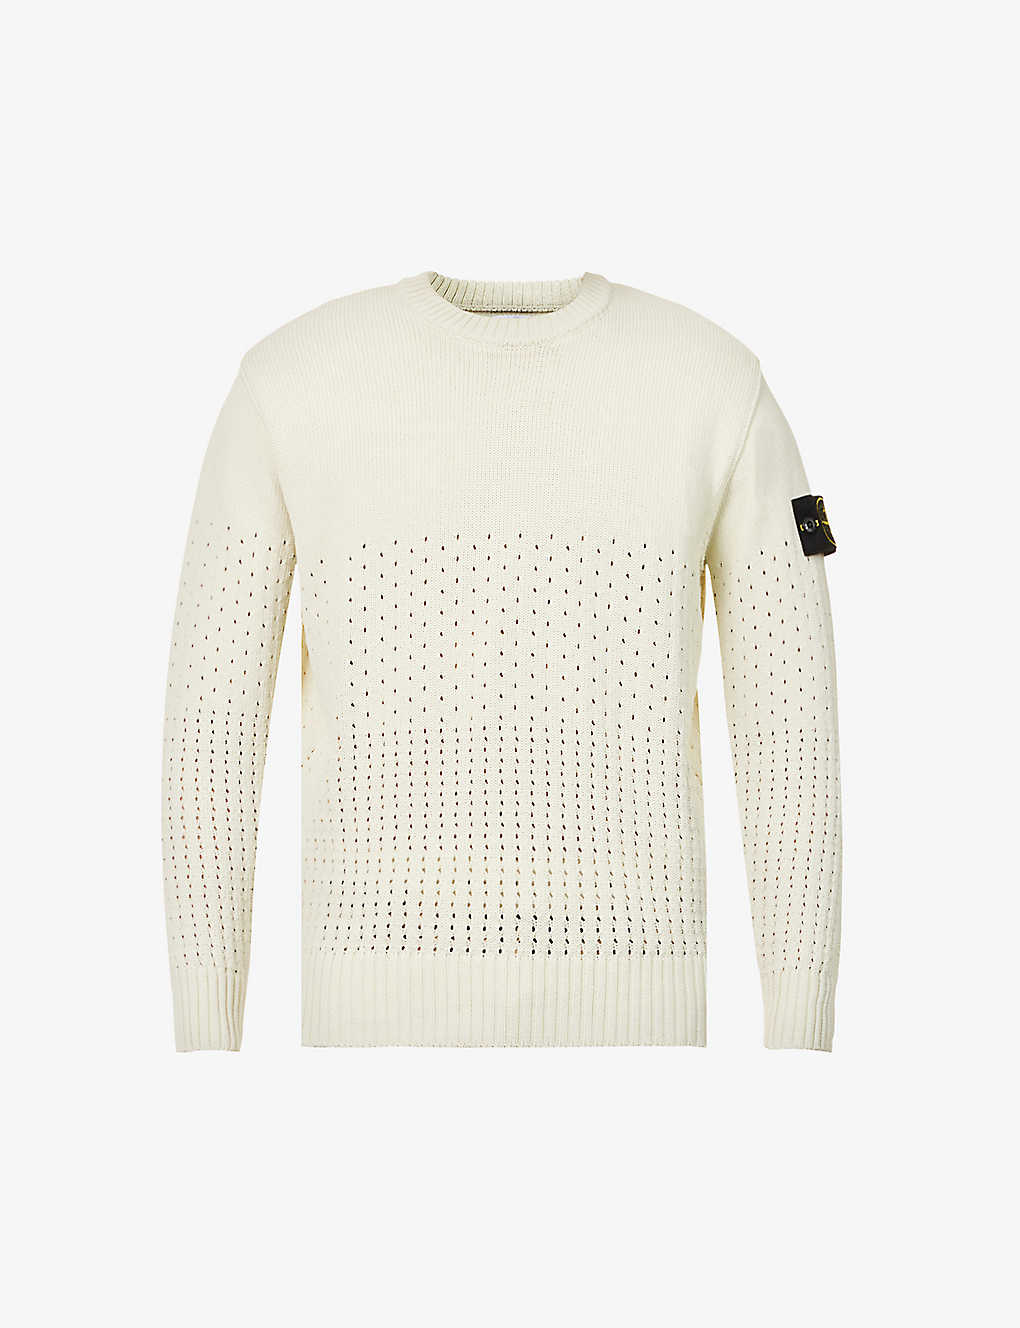 Stone Island Mens Light Green Brand-badge Crewneck Relaxed-fit Knitted Jumper